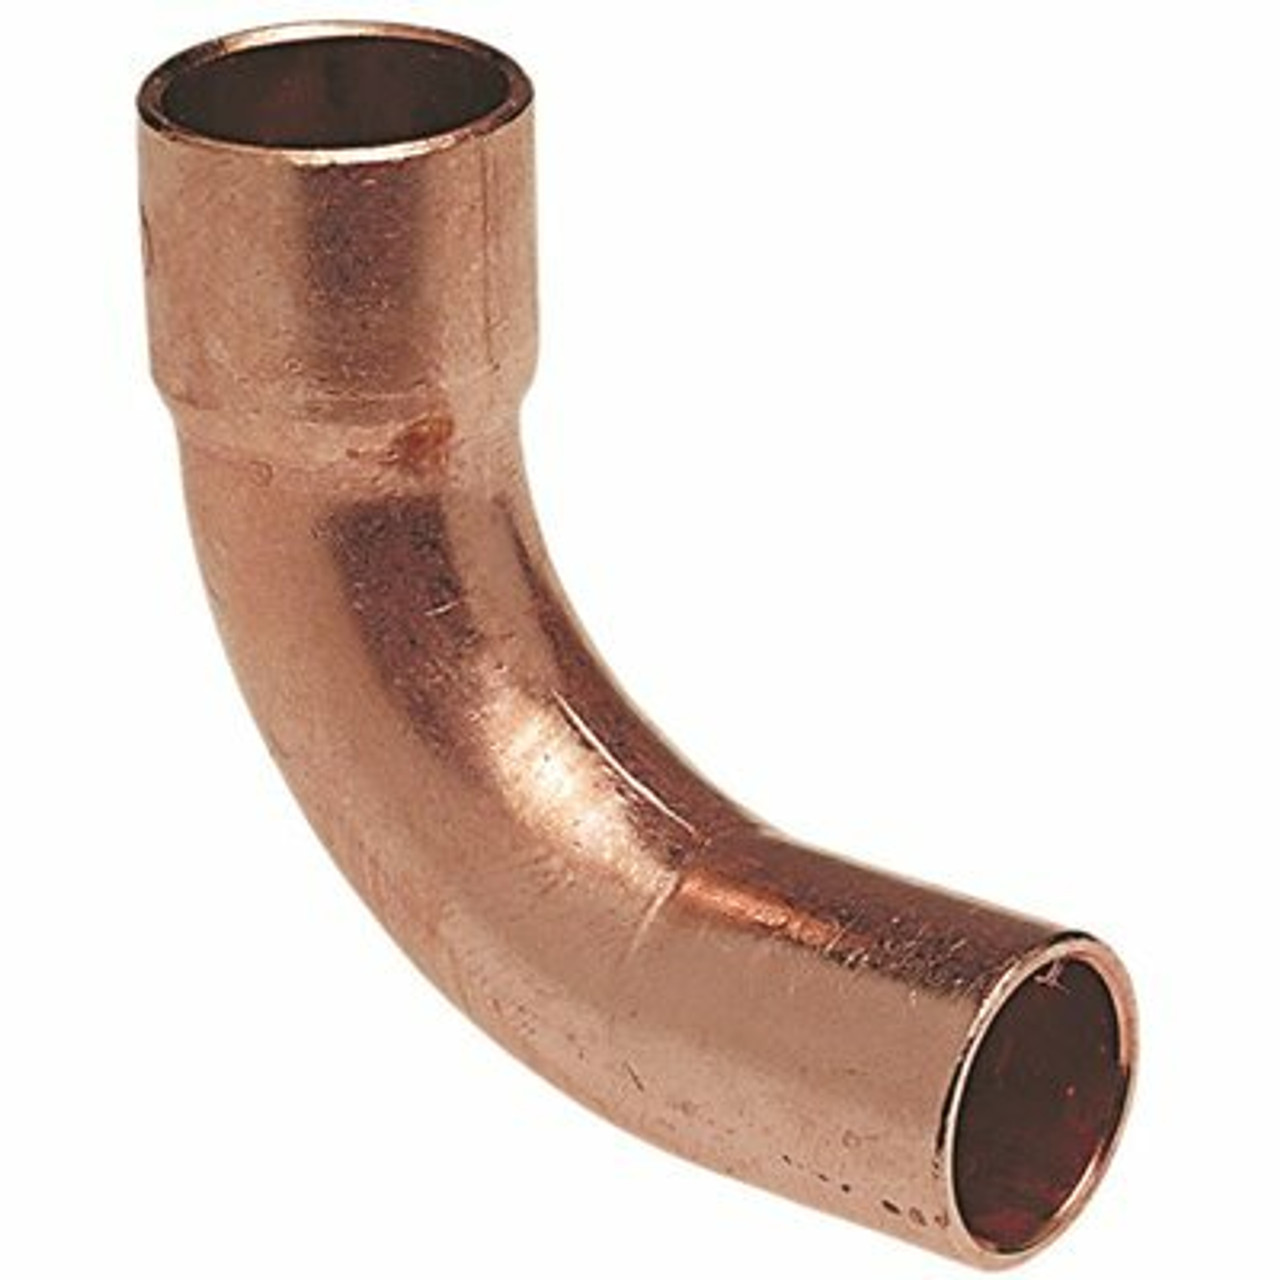 Nibco 1/4 In. Copper Pressure Ftg X Cup 90 Degree Long Radius Elbow Fitting